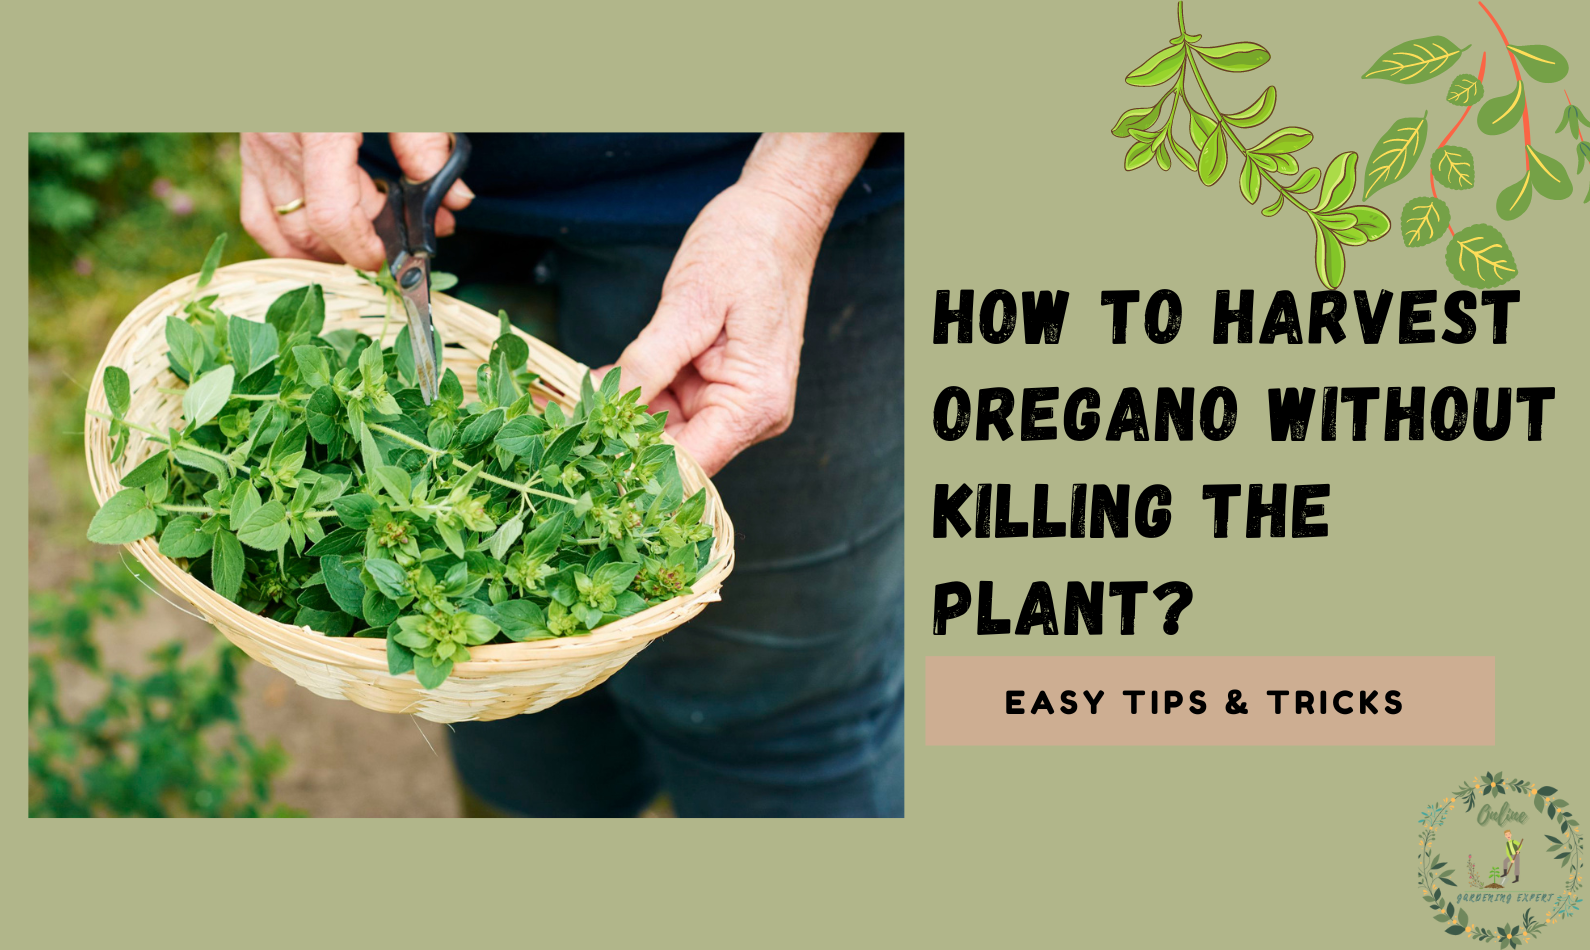 How To Harvest Oregano Without Killing The Plant?